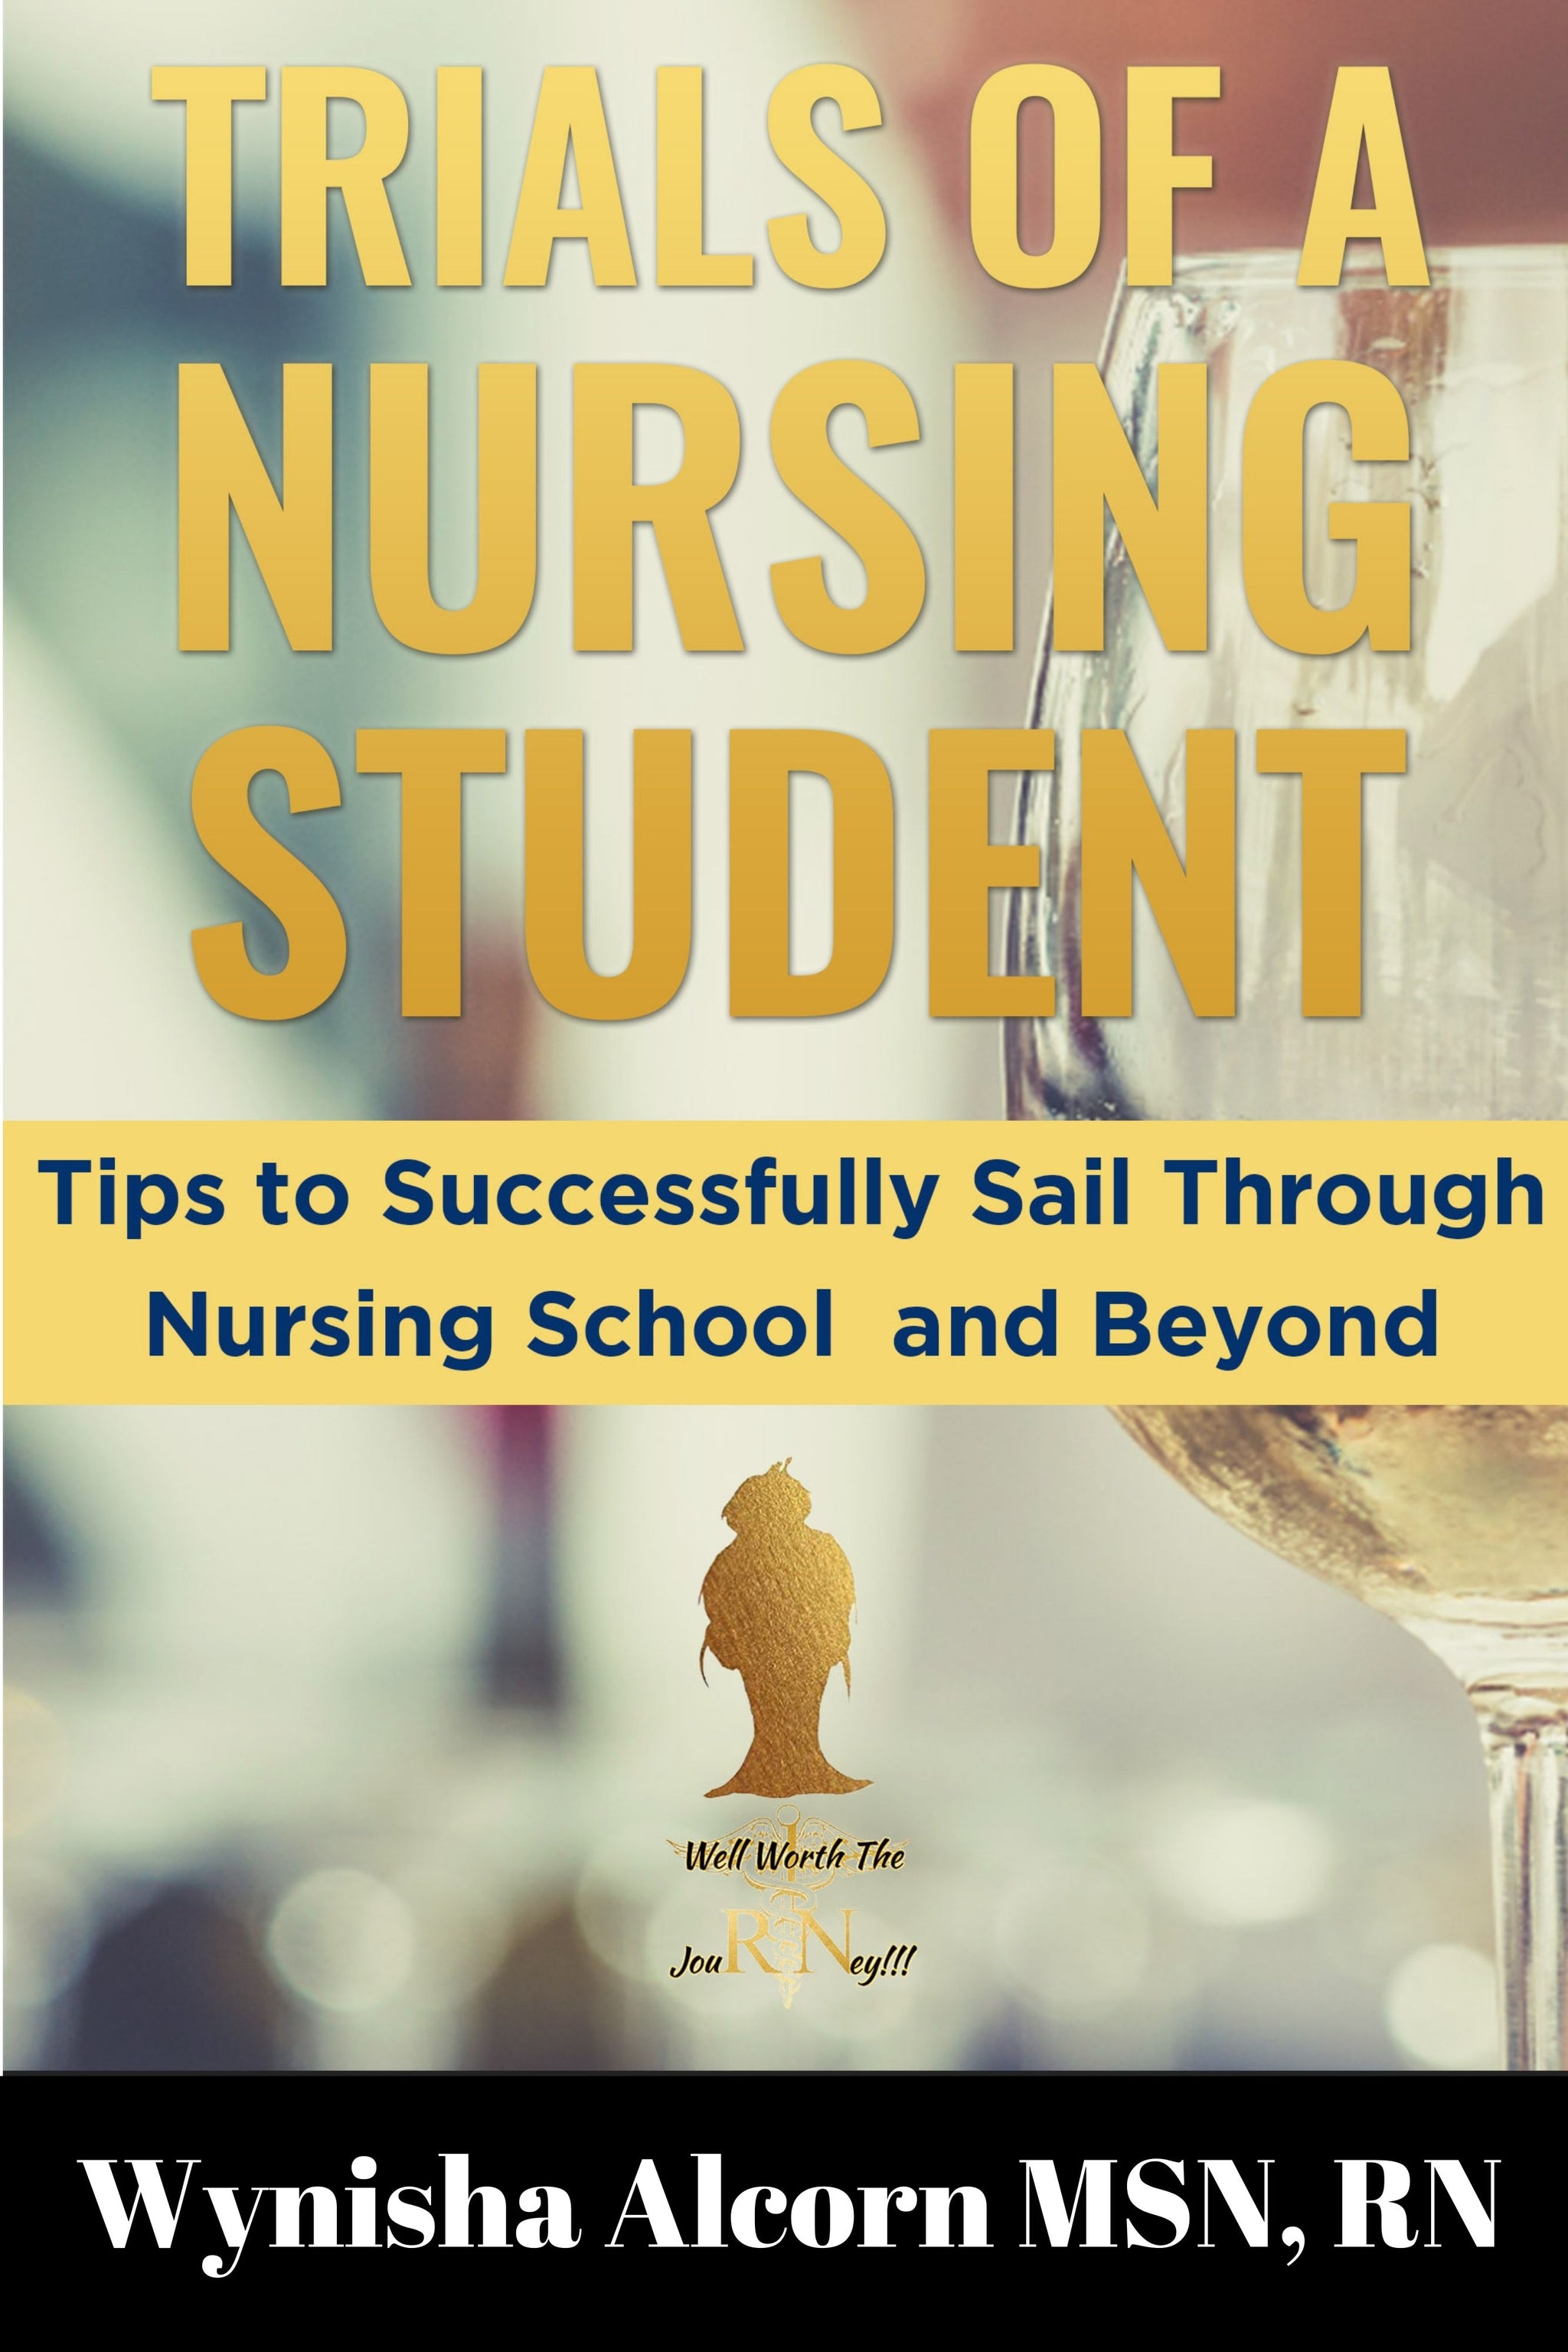 TRIALS OF A NURSING STUDENT: Tips to Successfully Sail Through Nursing School and Beyond